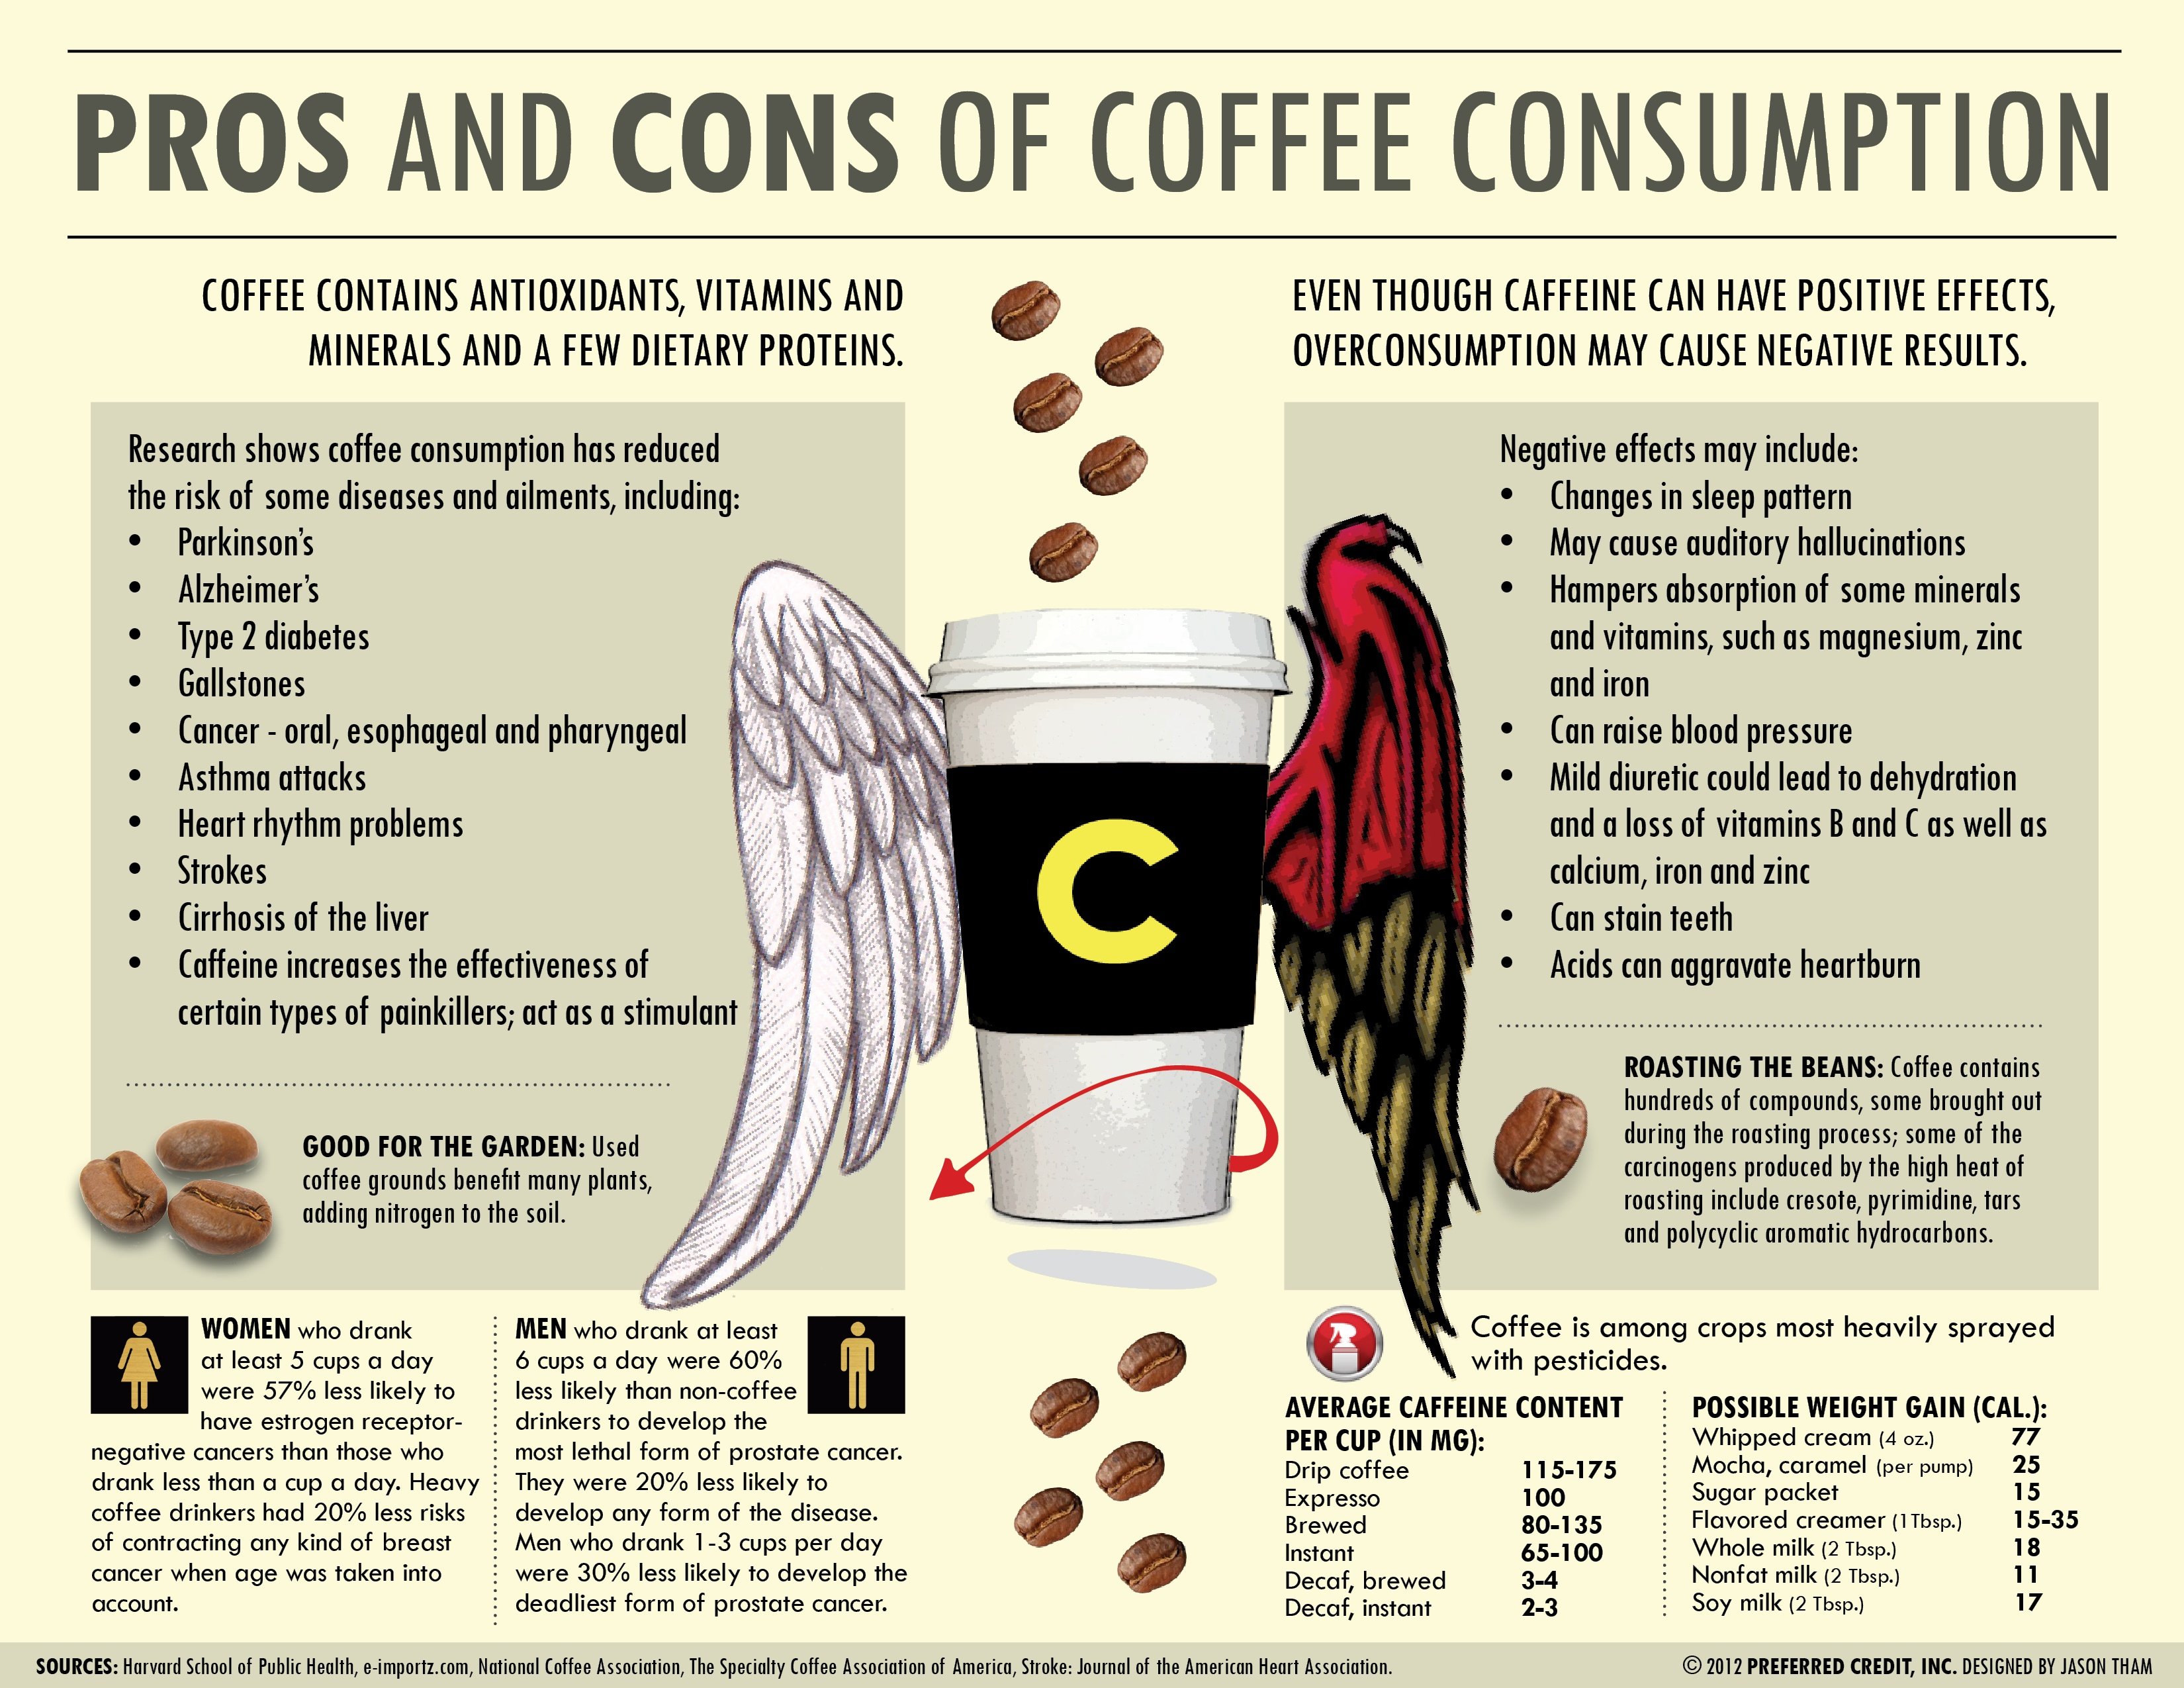 20 Health Benefits of Coffee (And How to Get the Maximum Benefits of It)